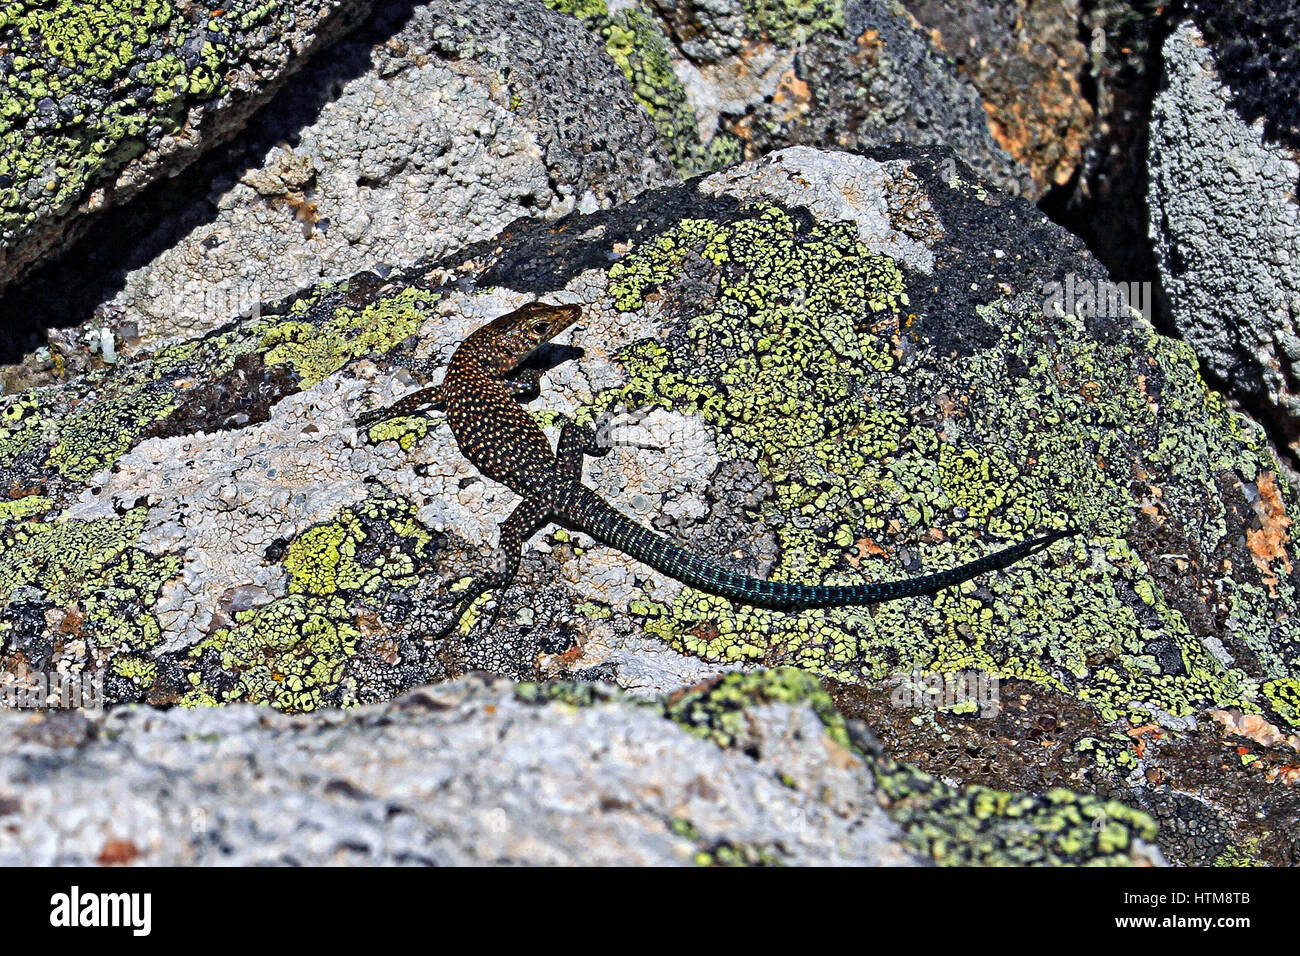 France Corsica lizard Bedriaga endemic species typical of environments with cliffs Stock Photo